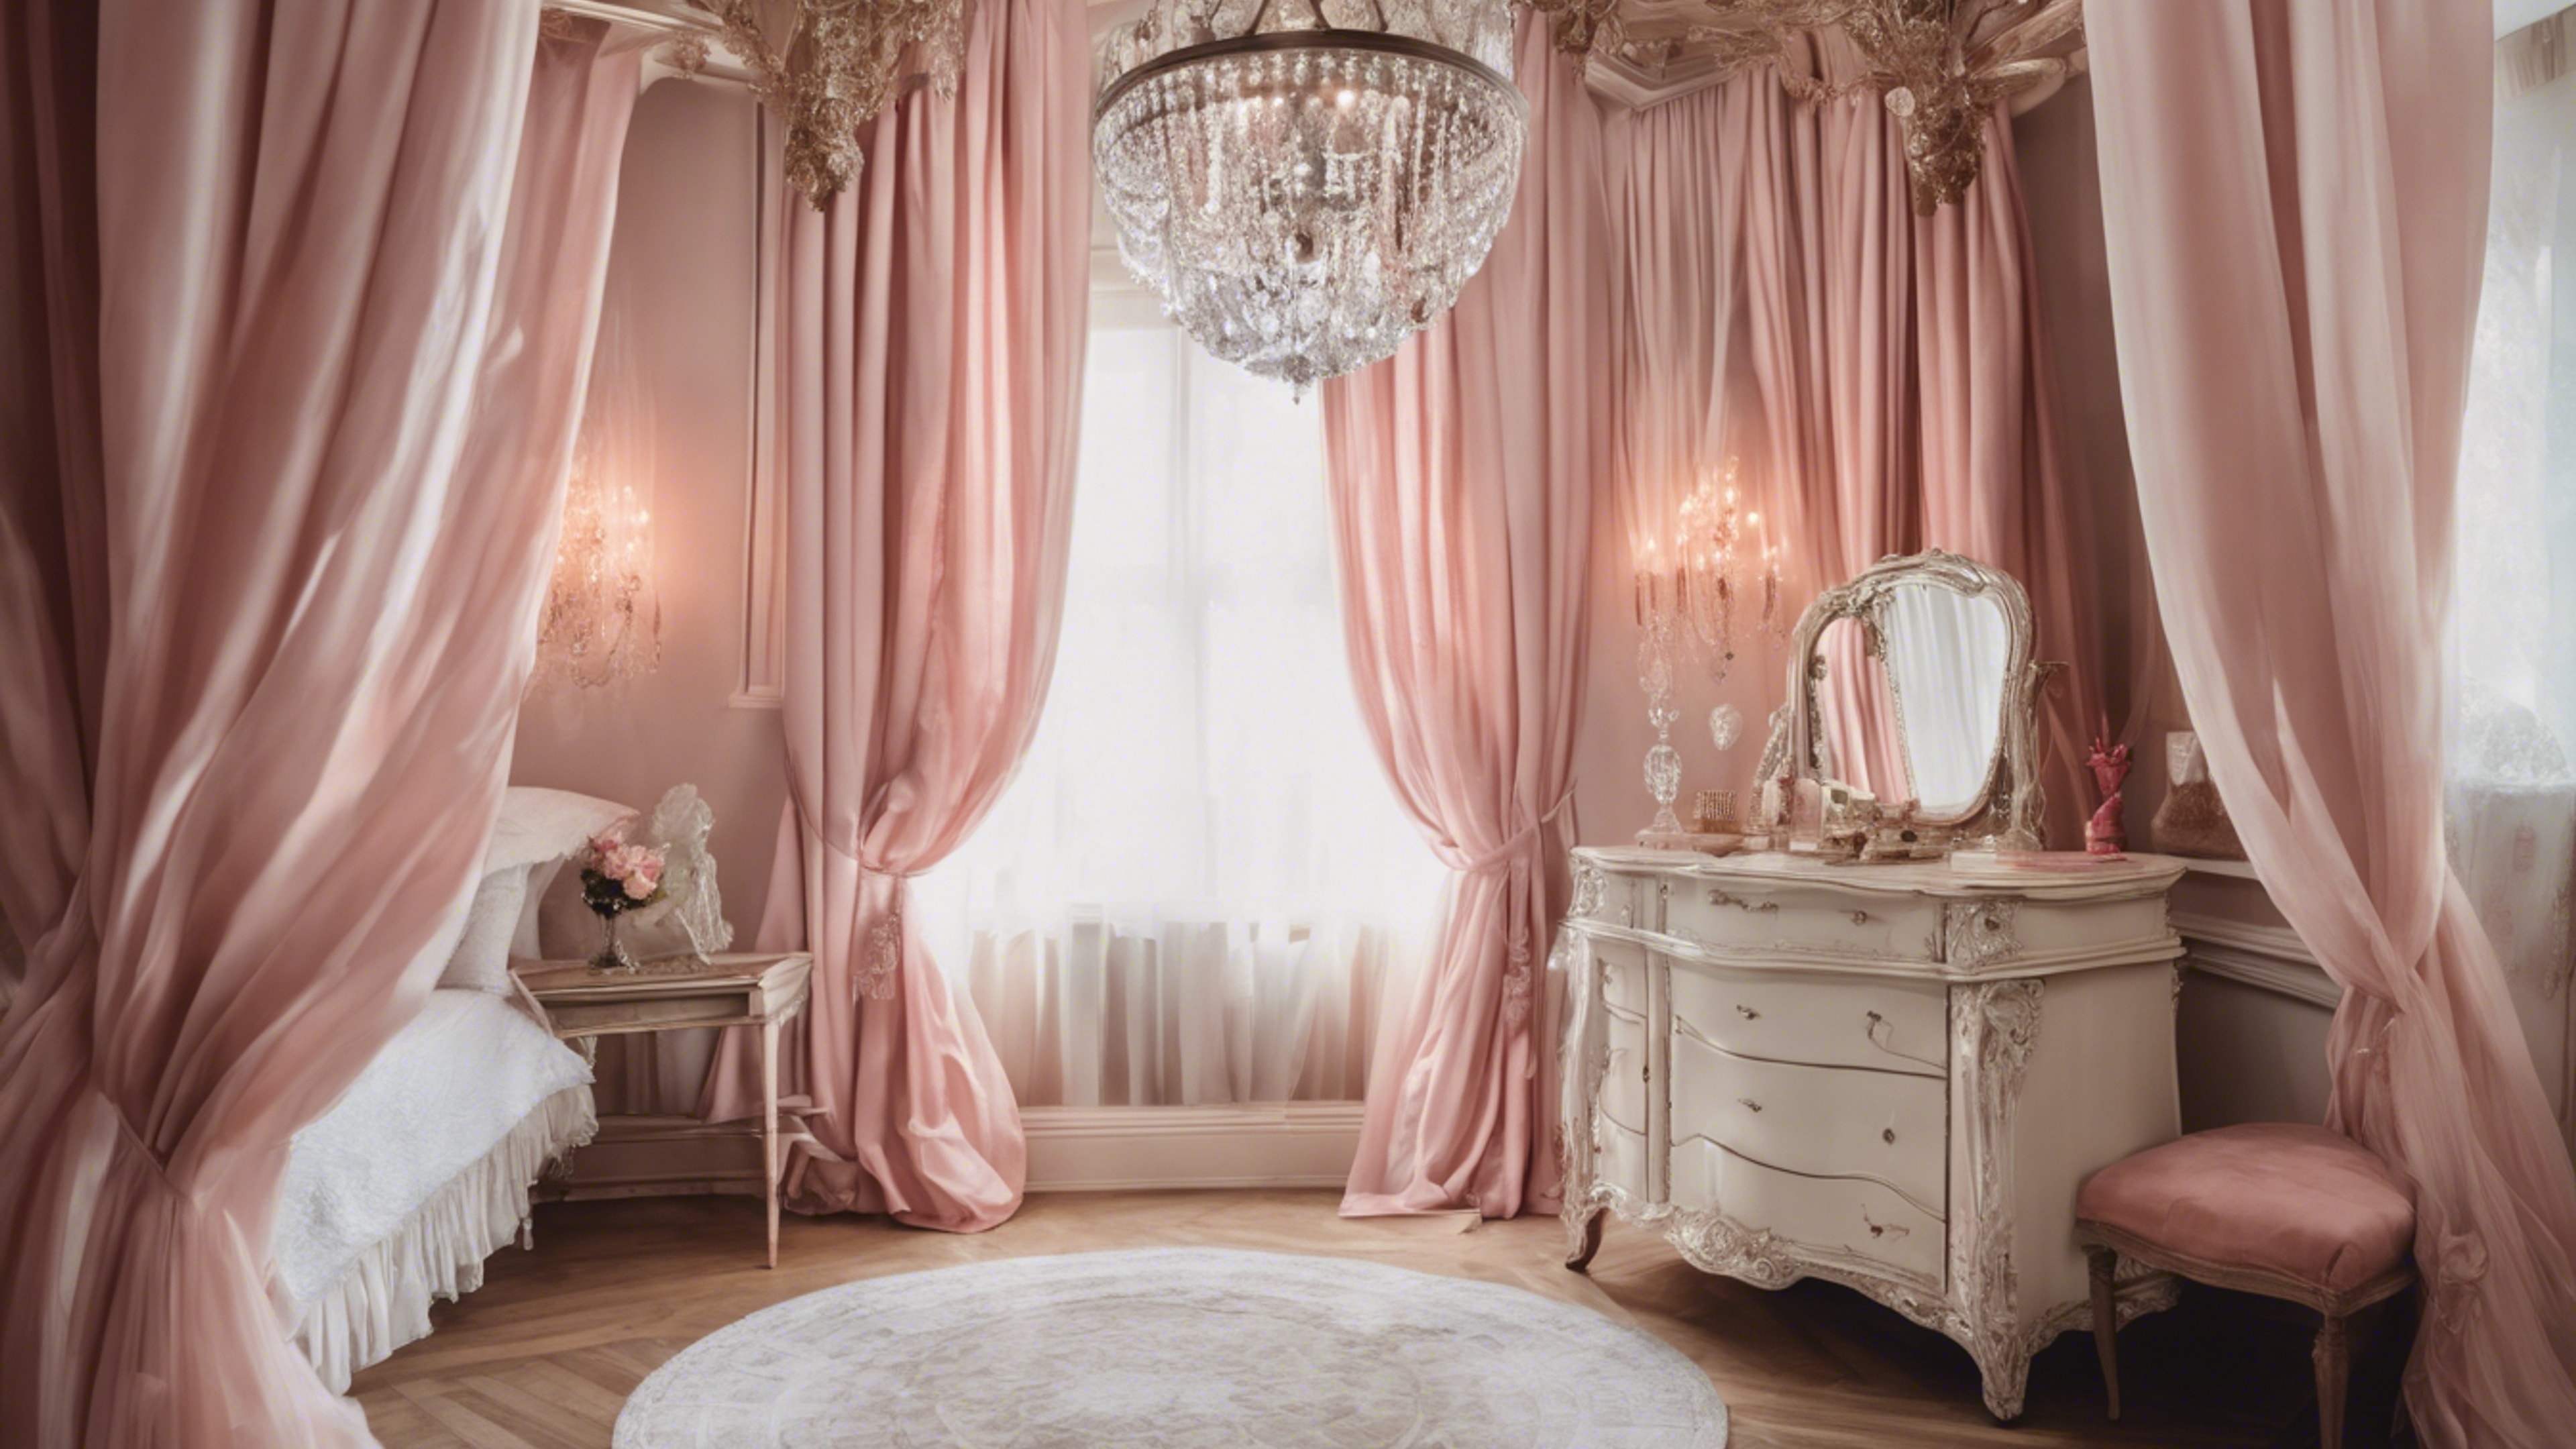 A feminine French bedroom, with canopy bed draped in soft-pink curtains, crystal chandelier hanging overhead, and an elegant antique vanity. Tapetai[9a96ceac1df24dd59ae9]